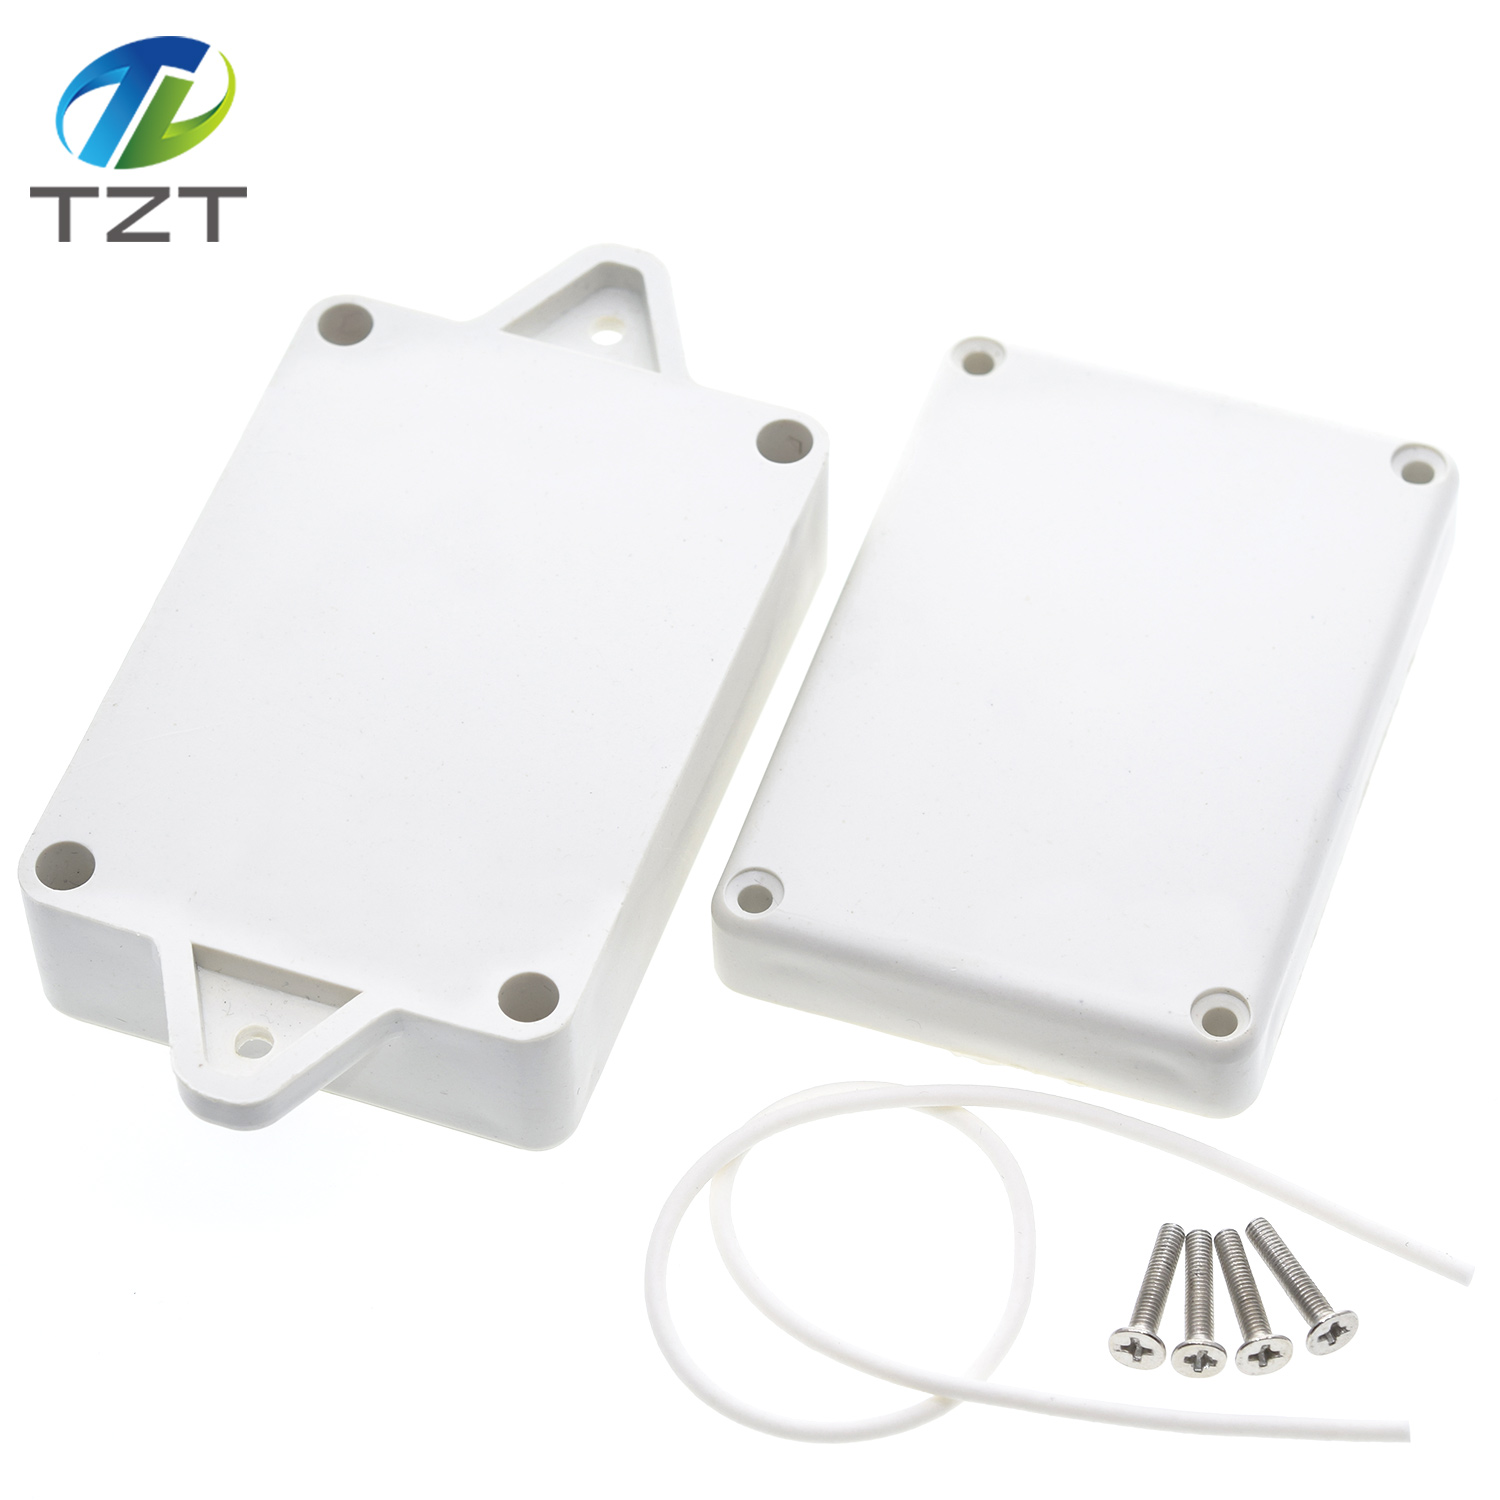 TZT 85x58x33mm Waterproof  Cover Plastic Electronic Cable Project Box Enclosure Case DIY